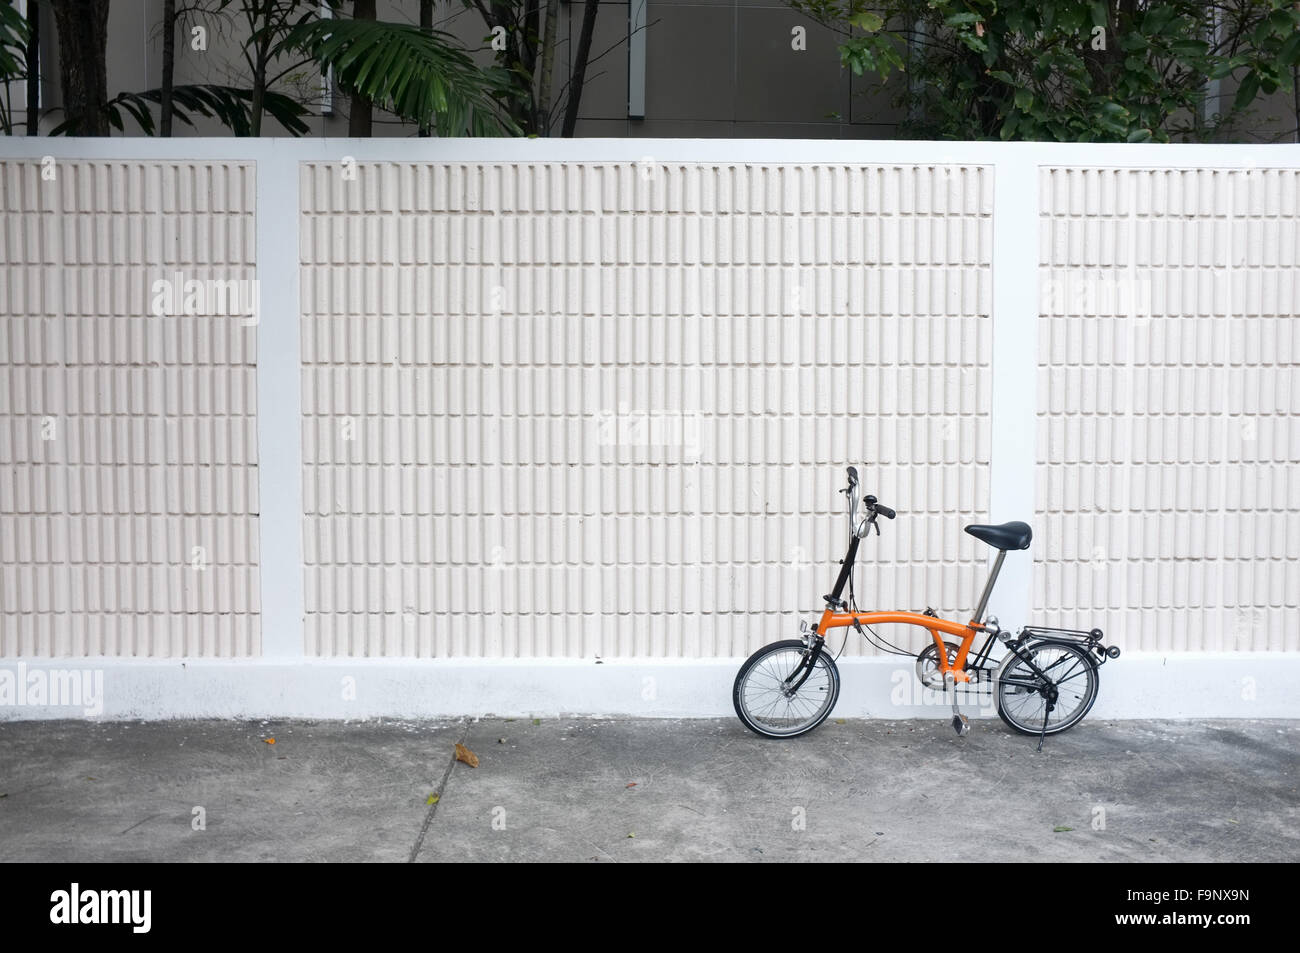 Orange bicycle parks in front of wall Stock Photo